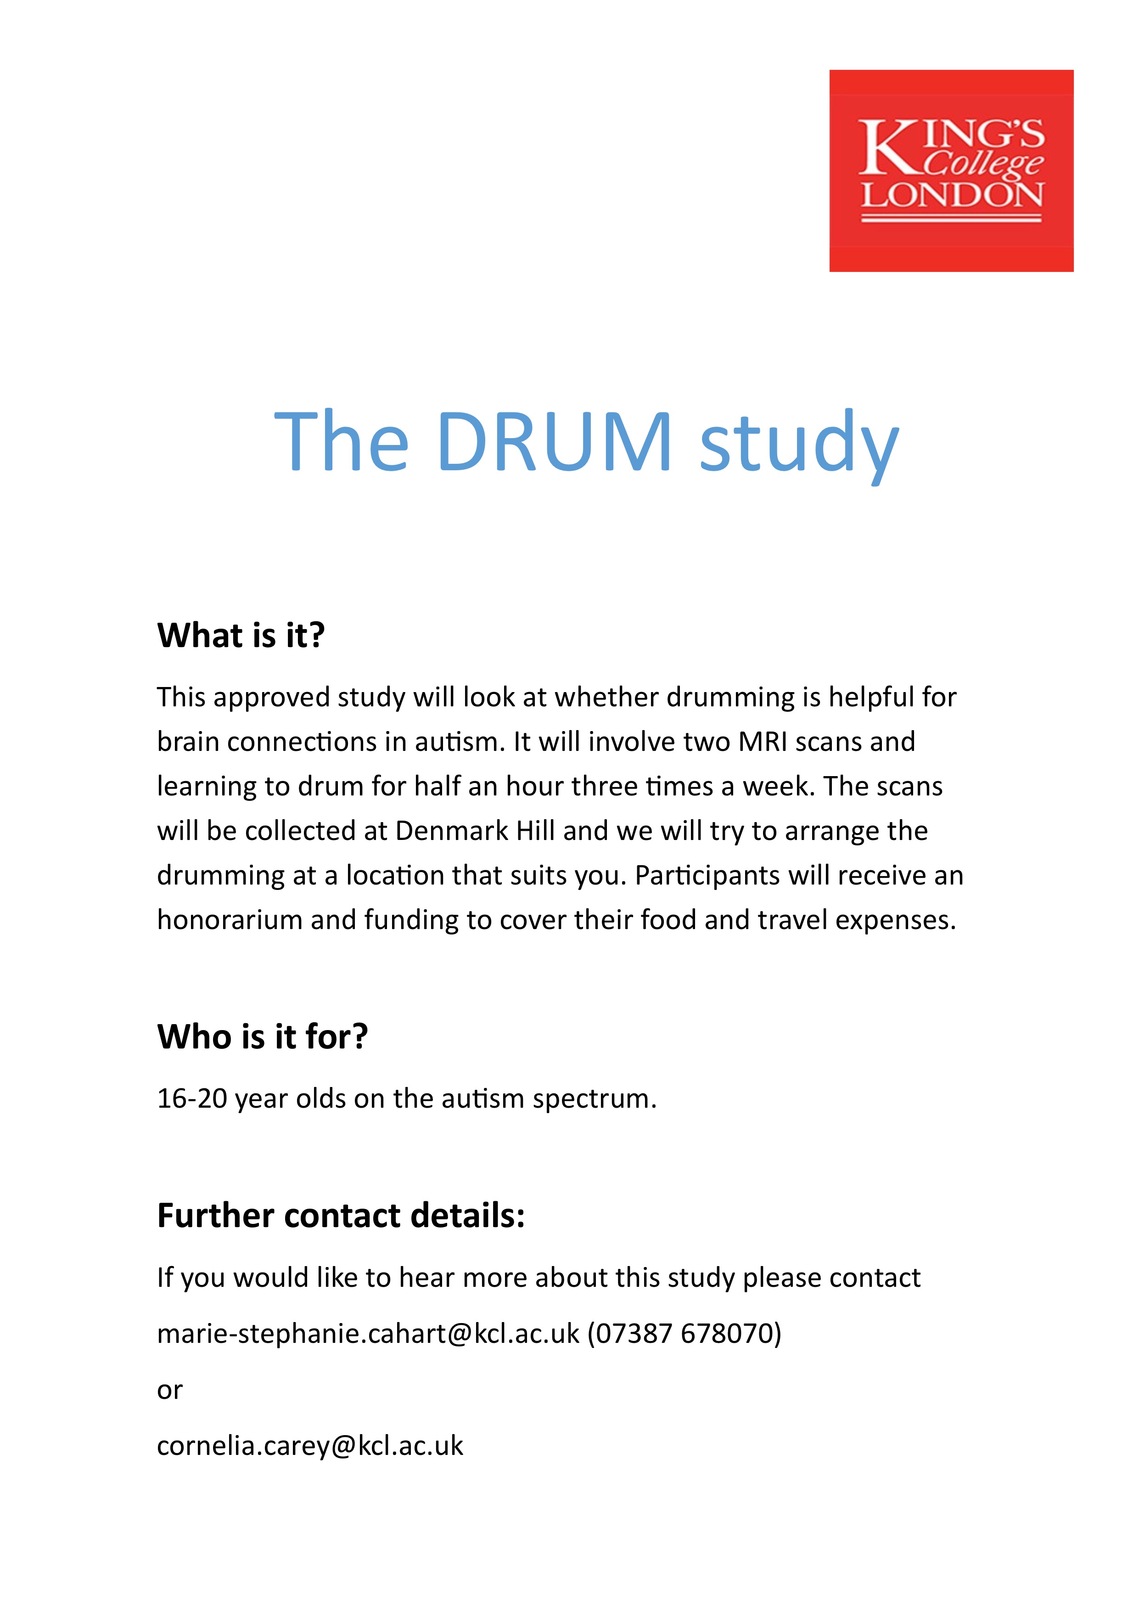 
Research into drumming for people with autism Flyer